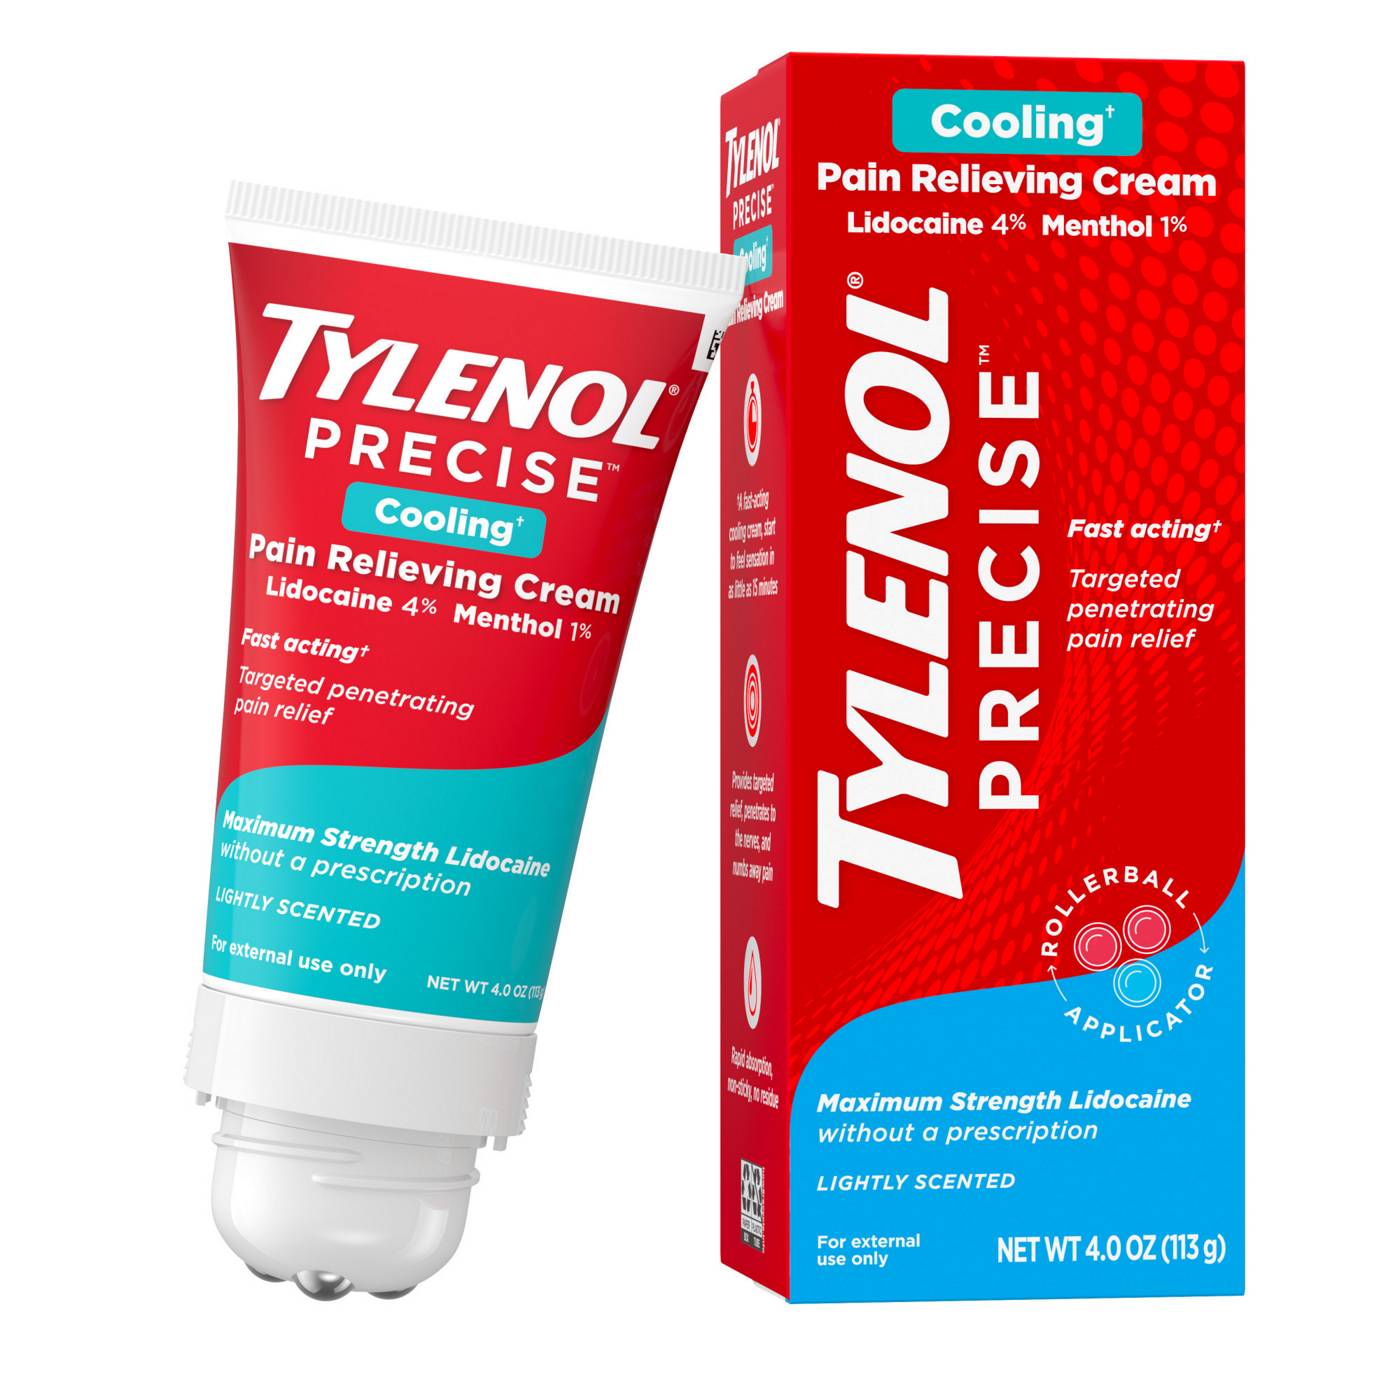 Tylenol Precise Cooling Pain Relieving Cream; image 2 of 6